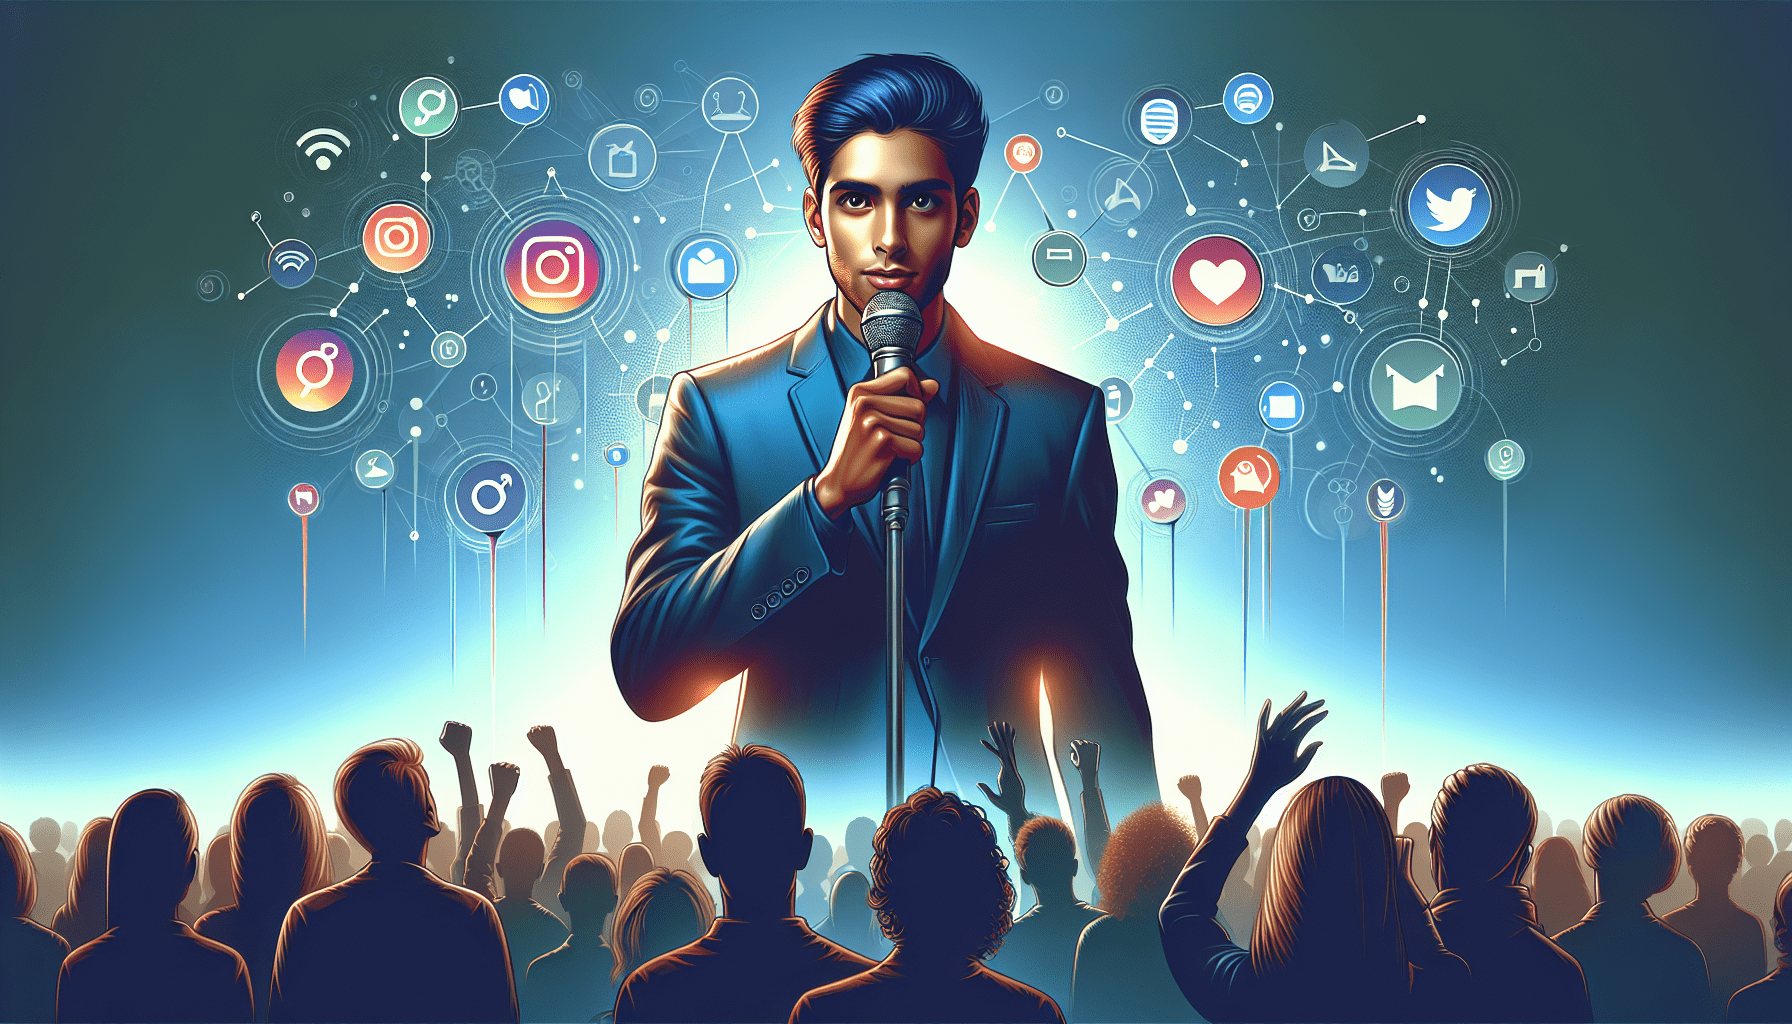 A young charismatic man giving an inspirational speech to a large audience, holding a microphone, with social media icons floating around him.